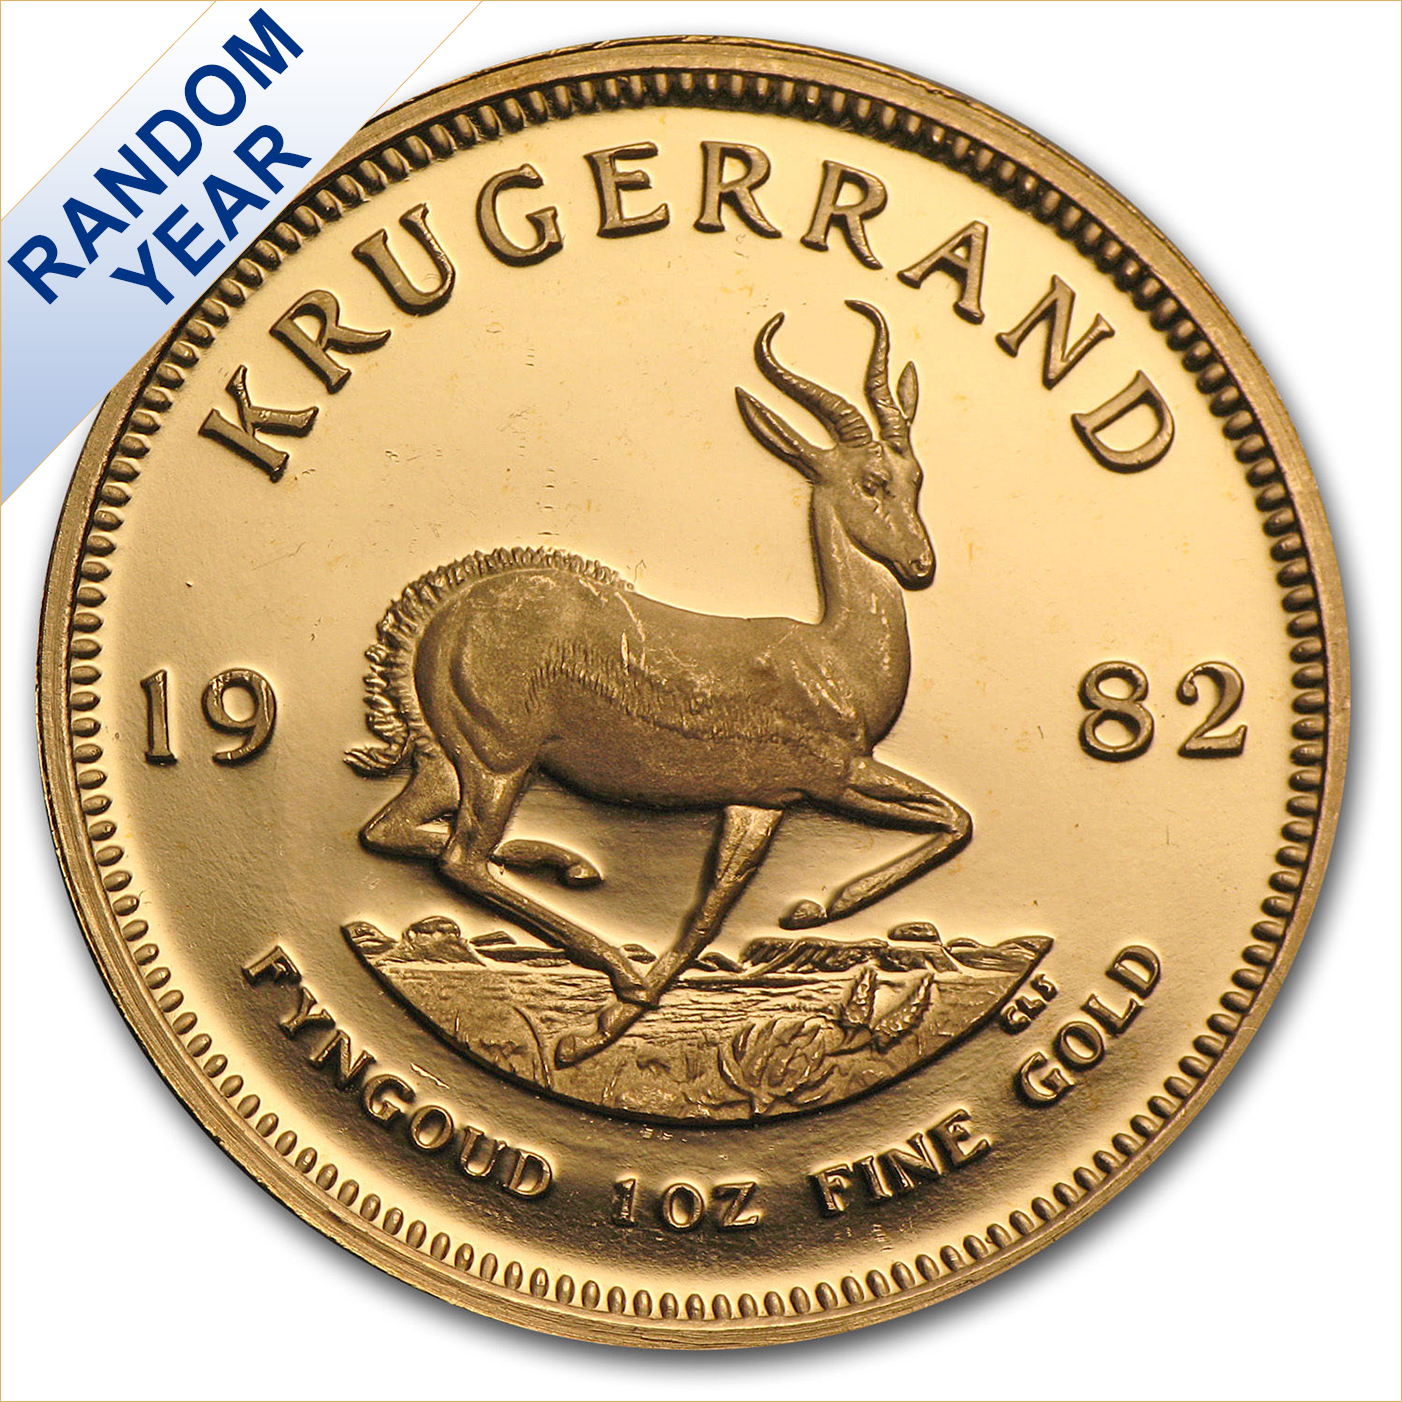 Kruger Gold Coin / 2000 South African Krugerrand 1oz Gold Coin | Free UK Delivery | Bitcoin Cash Ath